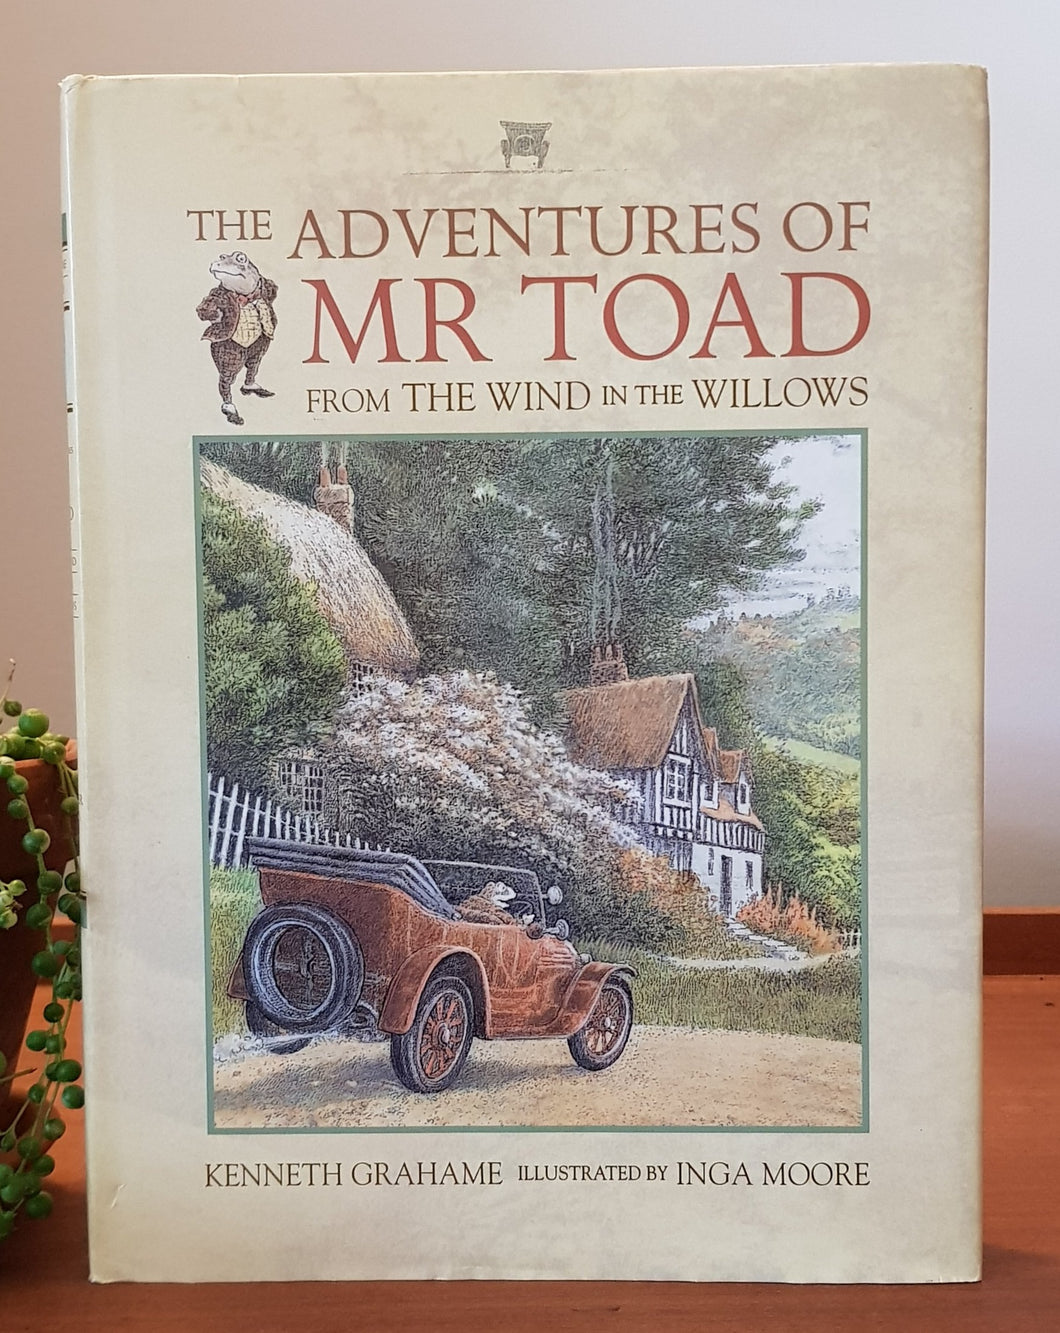 The Adventures of Mr Toad (From the Wind in the Willows) by Kenneth Grahame, Illustrated by Inga Moore